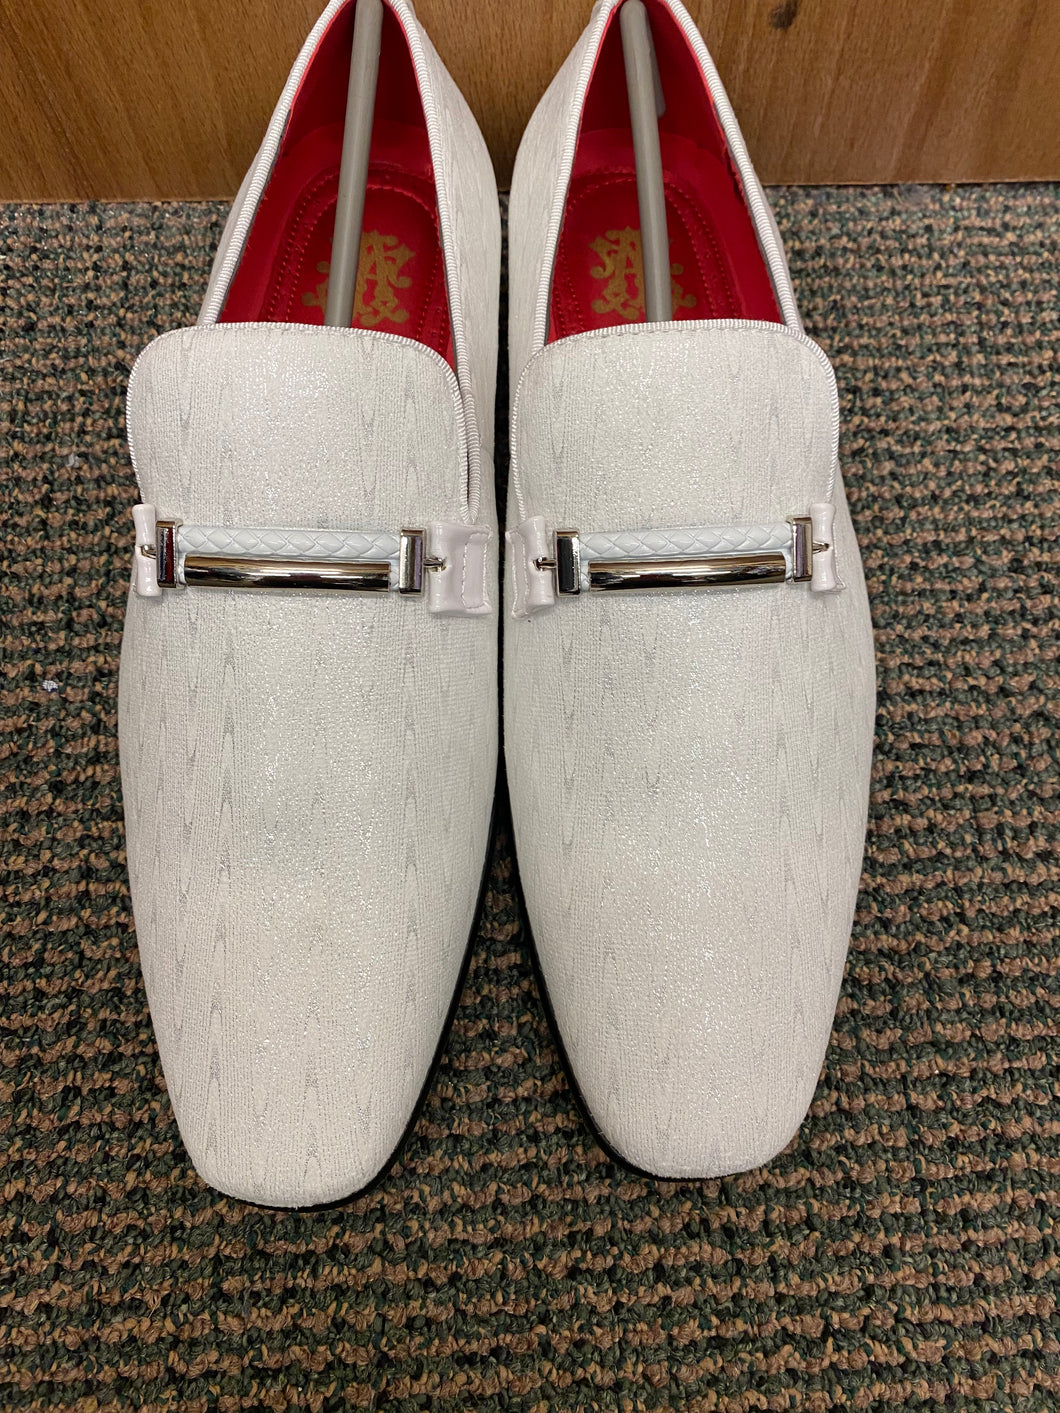 red bottom dress shoes